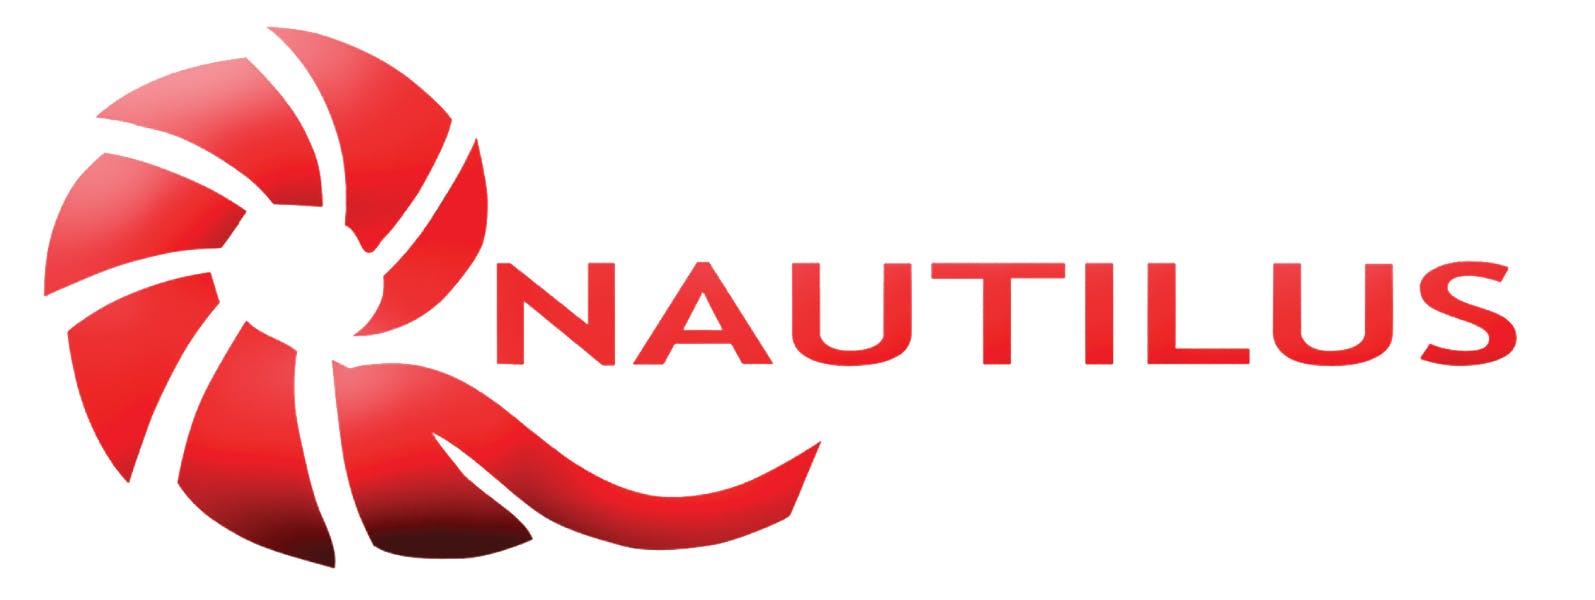 The Nautilus logo which reads "Nautilus" in red font next to a red shell.